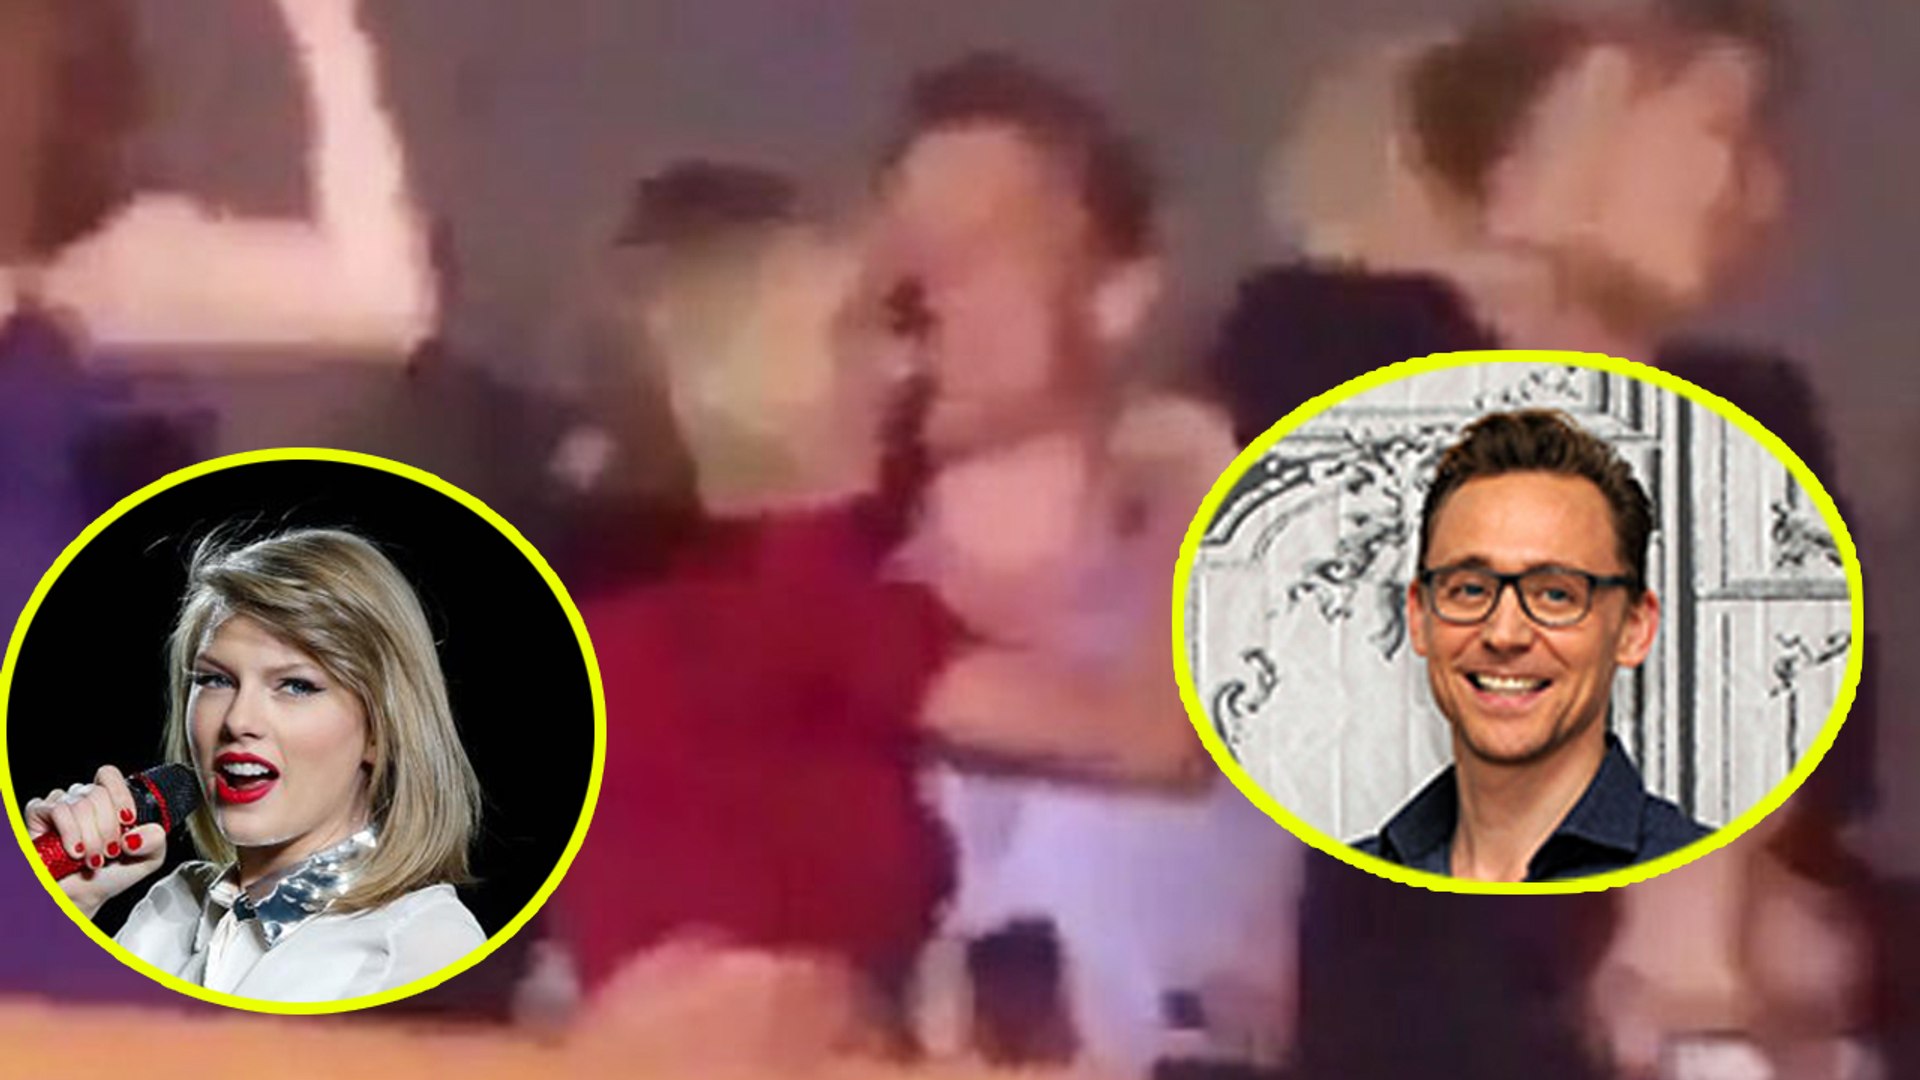 Taylor Swift and Tom Hiddleston Dance Like Crazy at Selena Gomez Concert